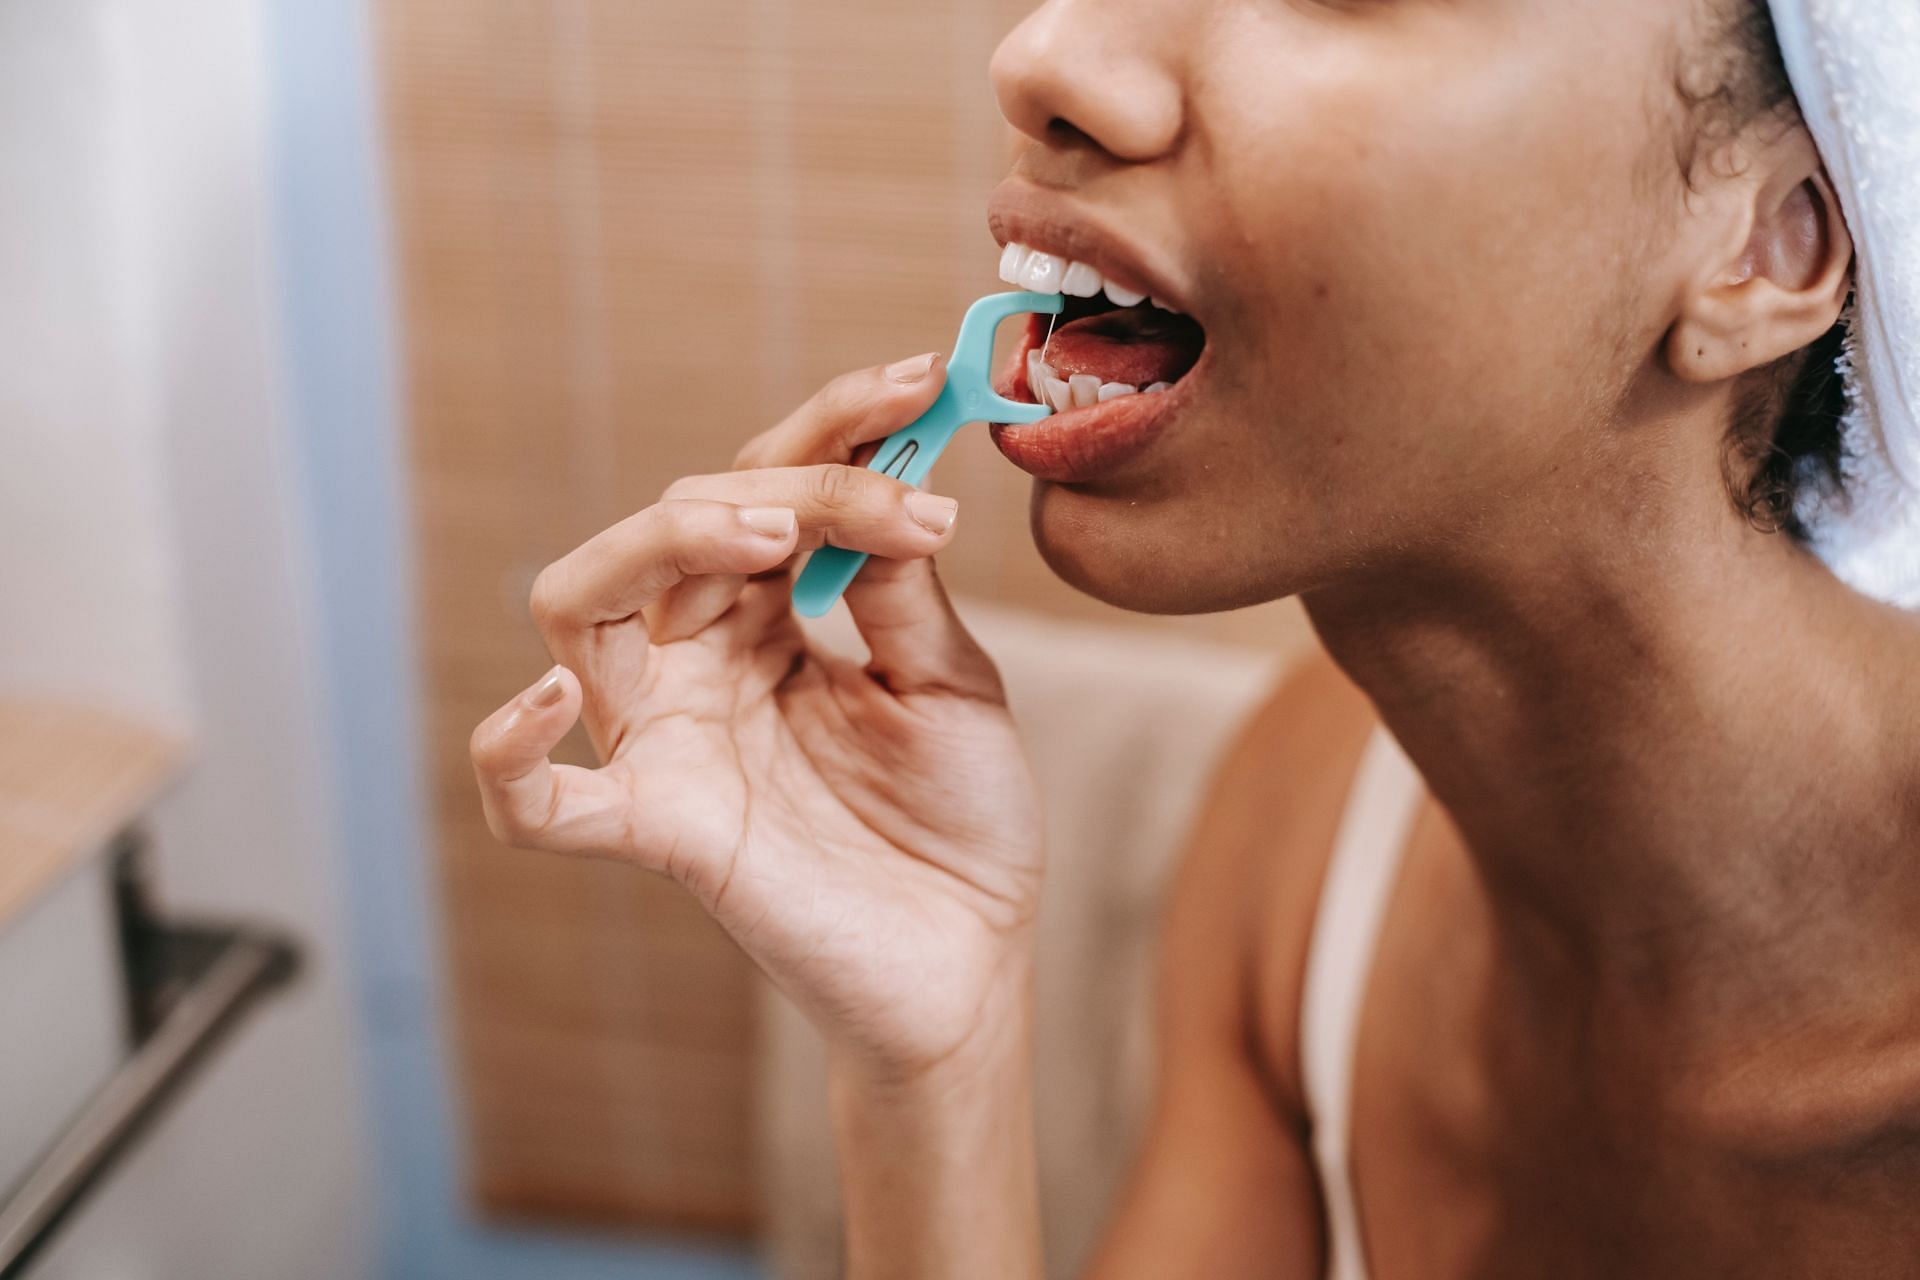 Use a fresh section of floss for each tooth to avoid transferring bacteria between tooth. (Image via Pexels)